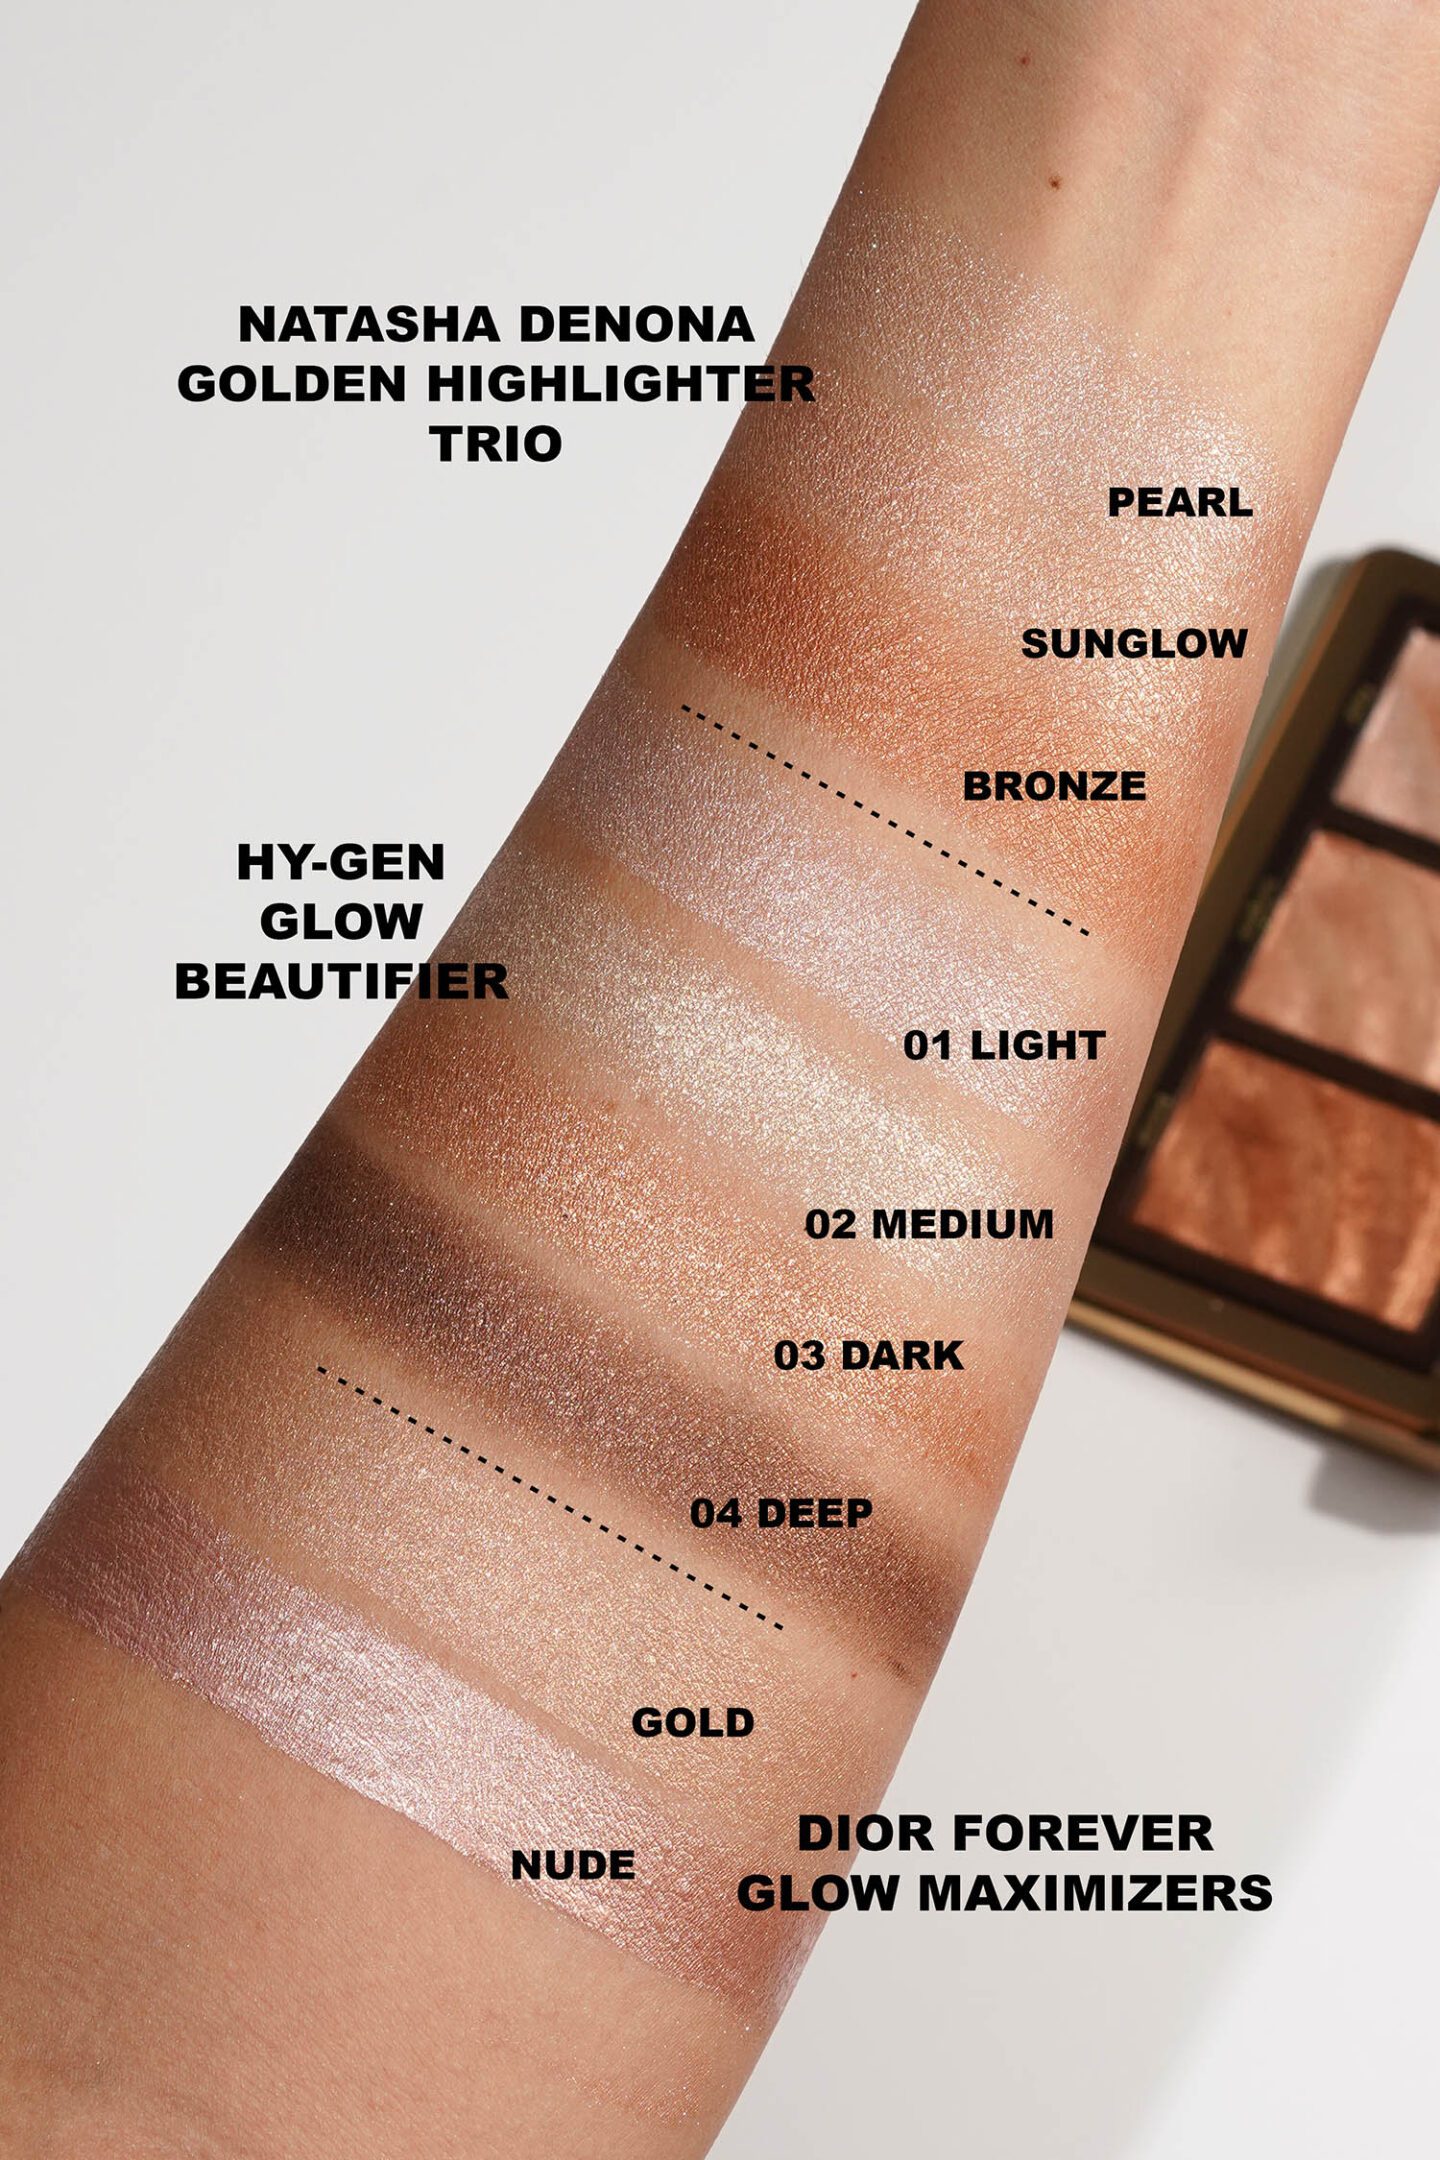 Natasha Denona Golden Highlighter Trio and Hy-Gen Skincare Infused Glow Beautifier swatches